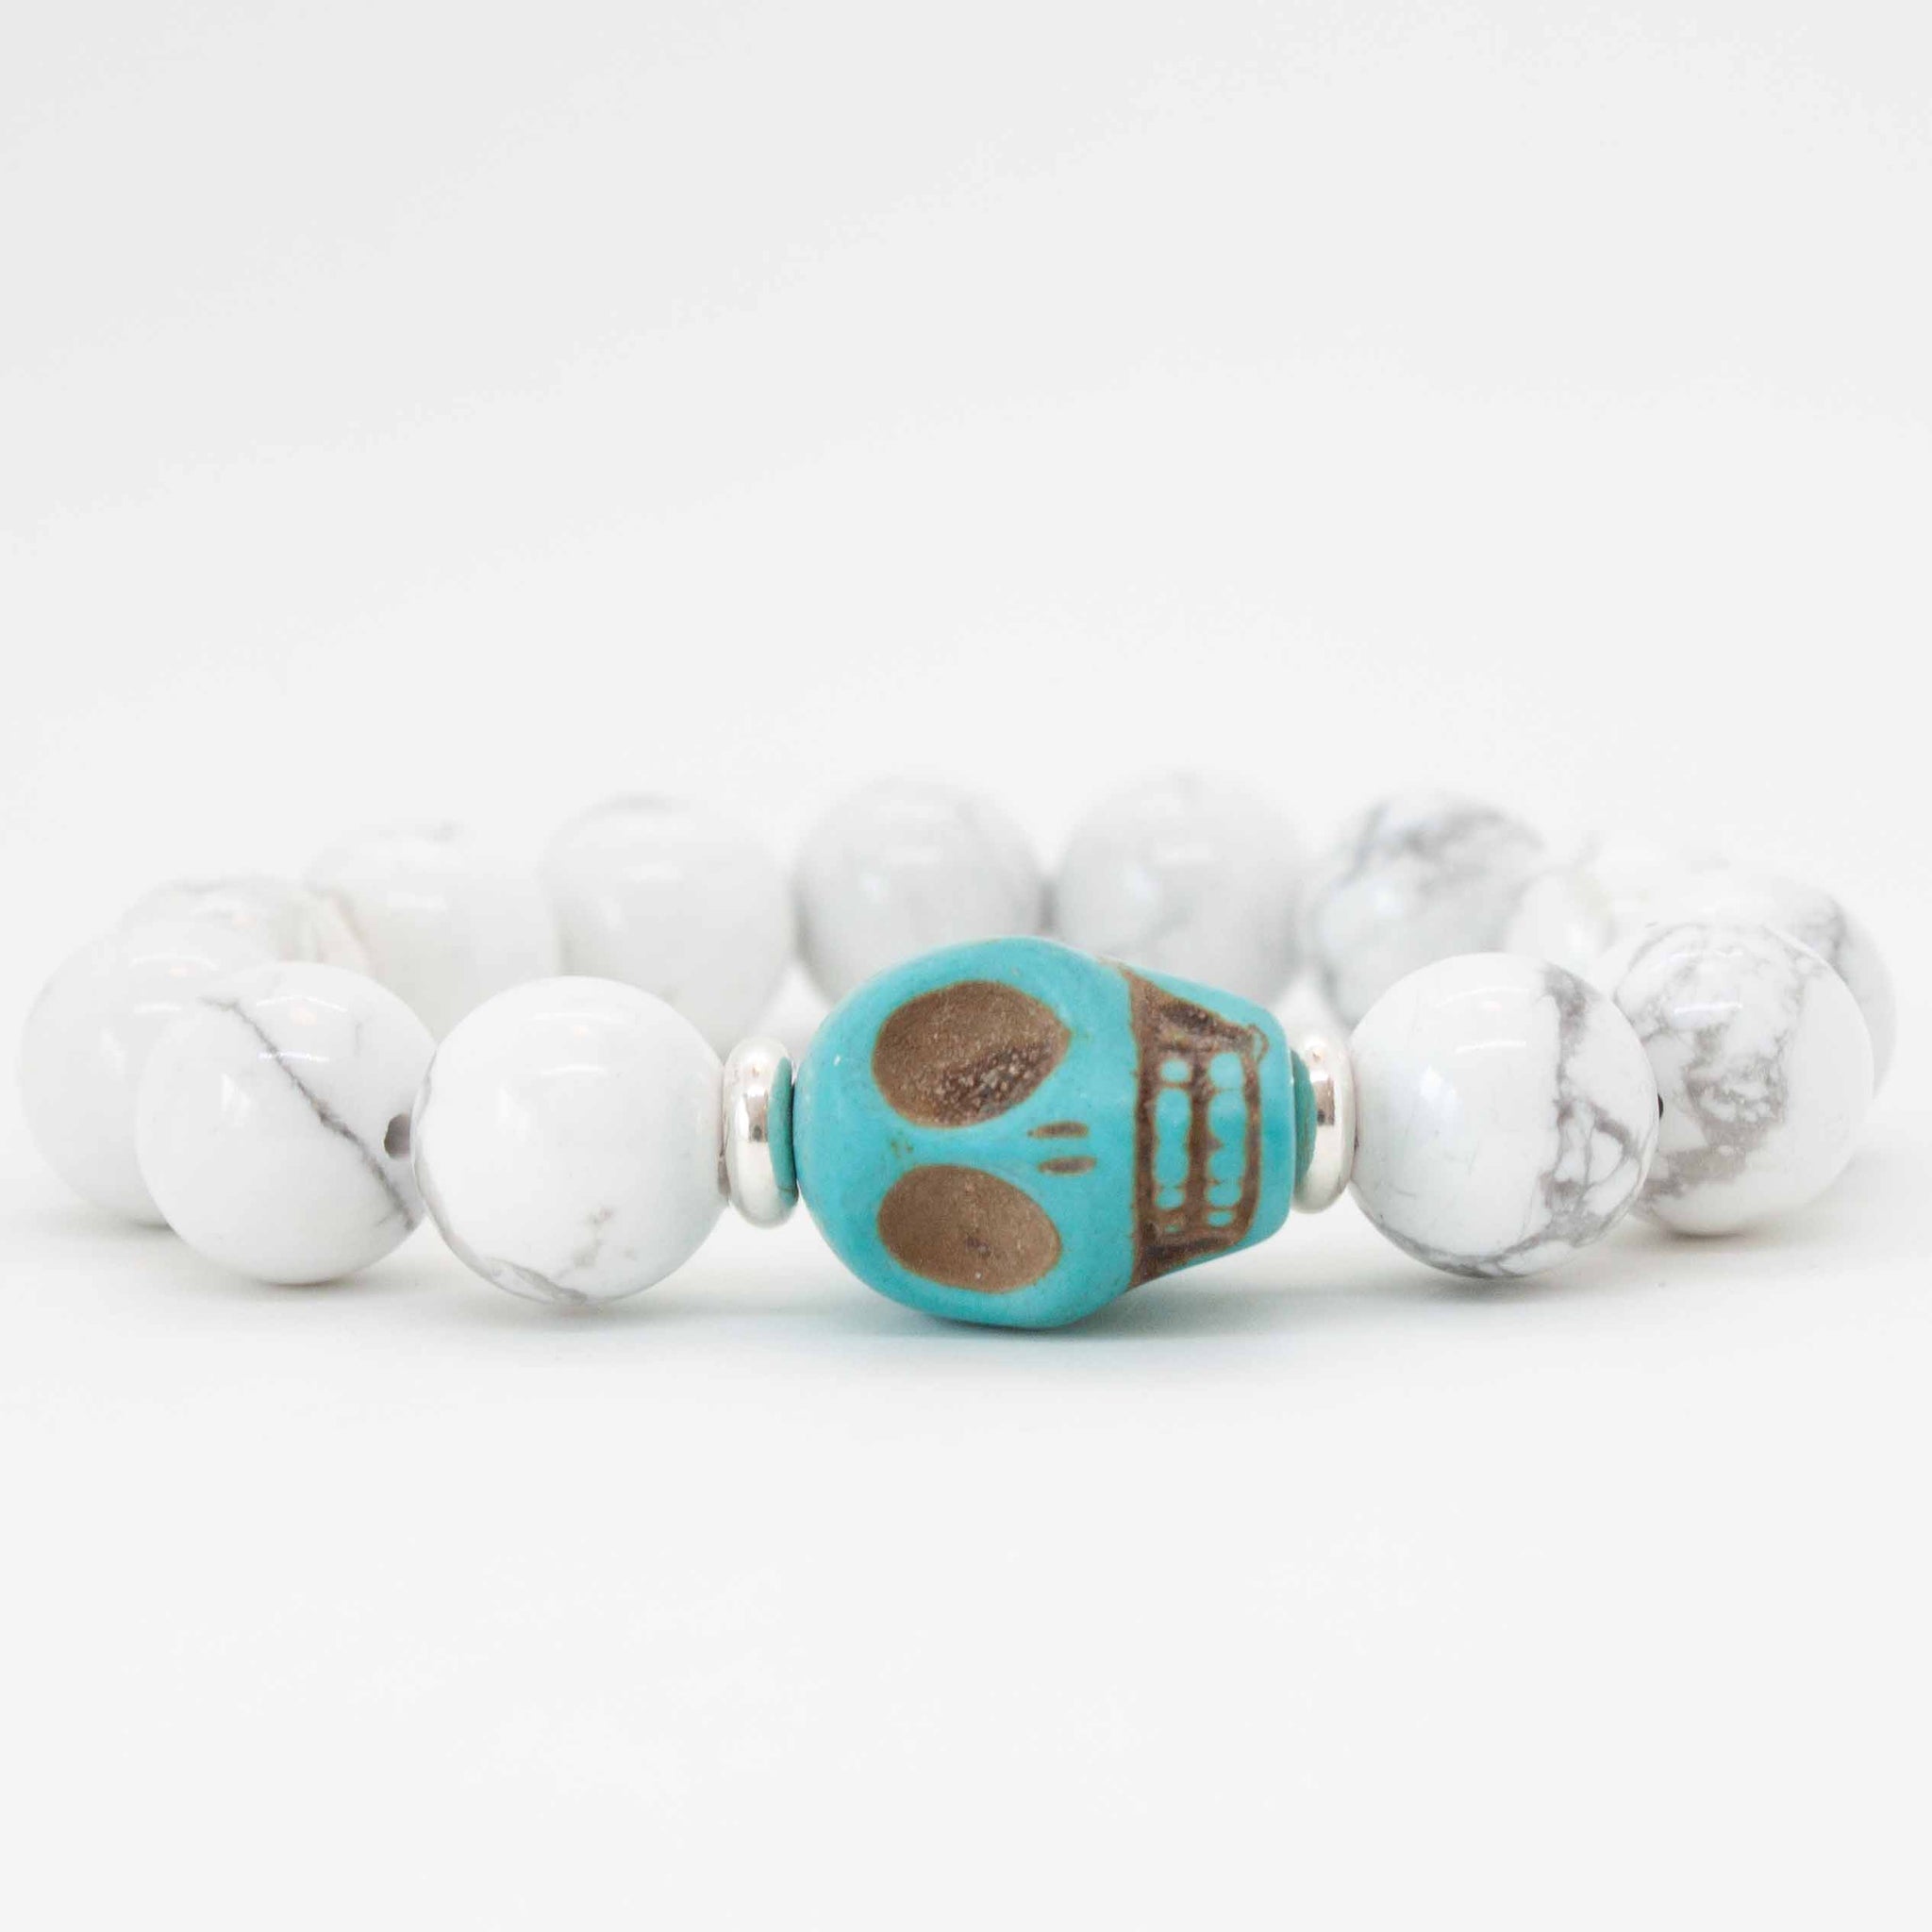 Bright colour a some fun white howlite and a turquoise skull bead. Come on and get edgy, girl! 7 inch beaded white howlite stretchy bracelet with turquoise skull bead, double strung with silk elastic cord. Handmade in Toronto by kp jewelry co.